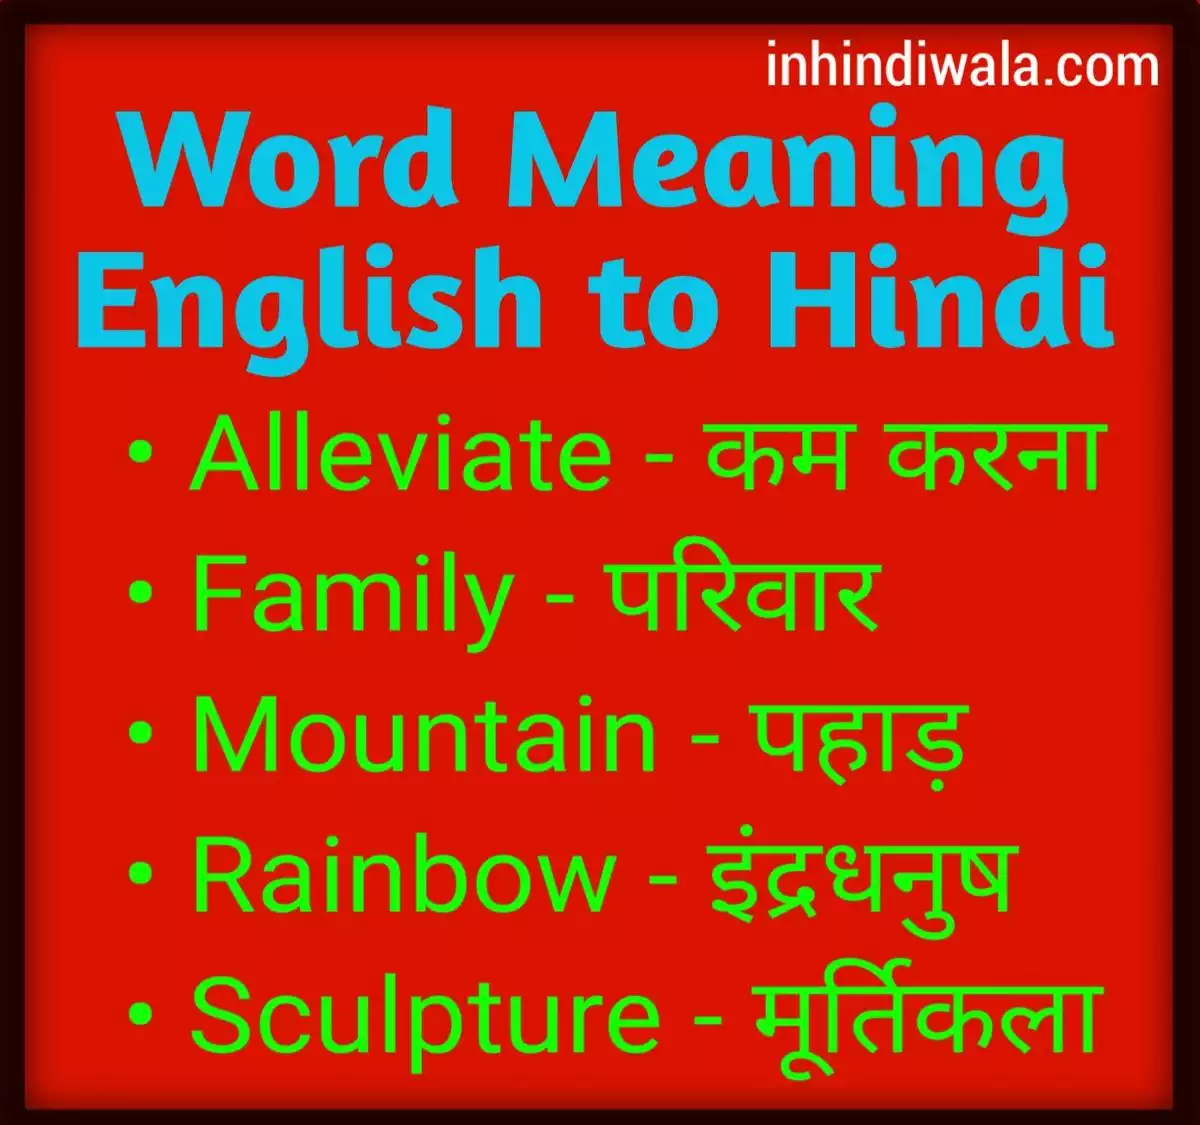 Word meaning English to Hindi